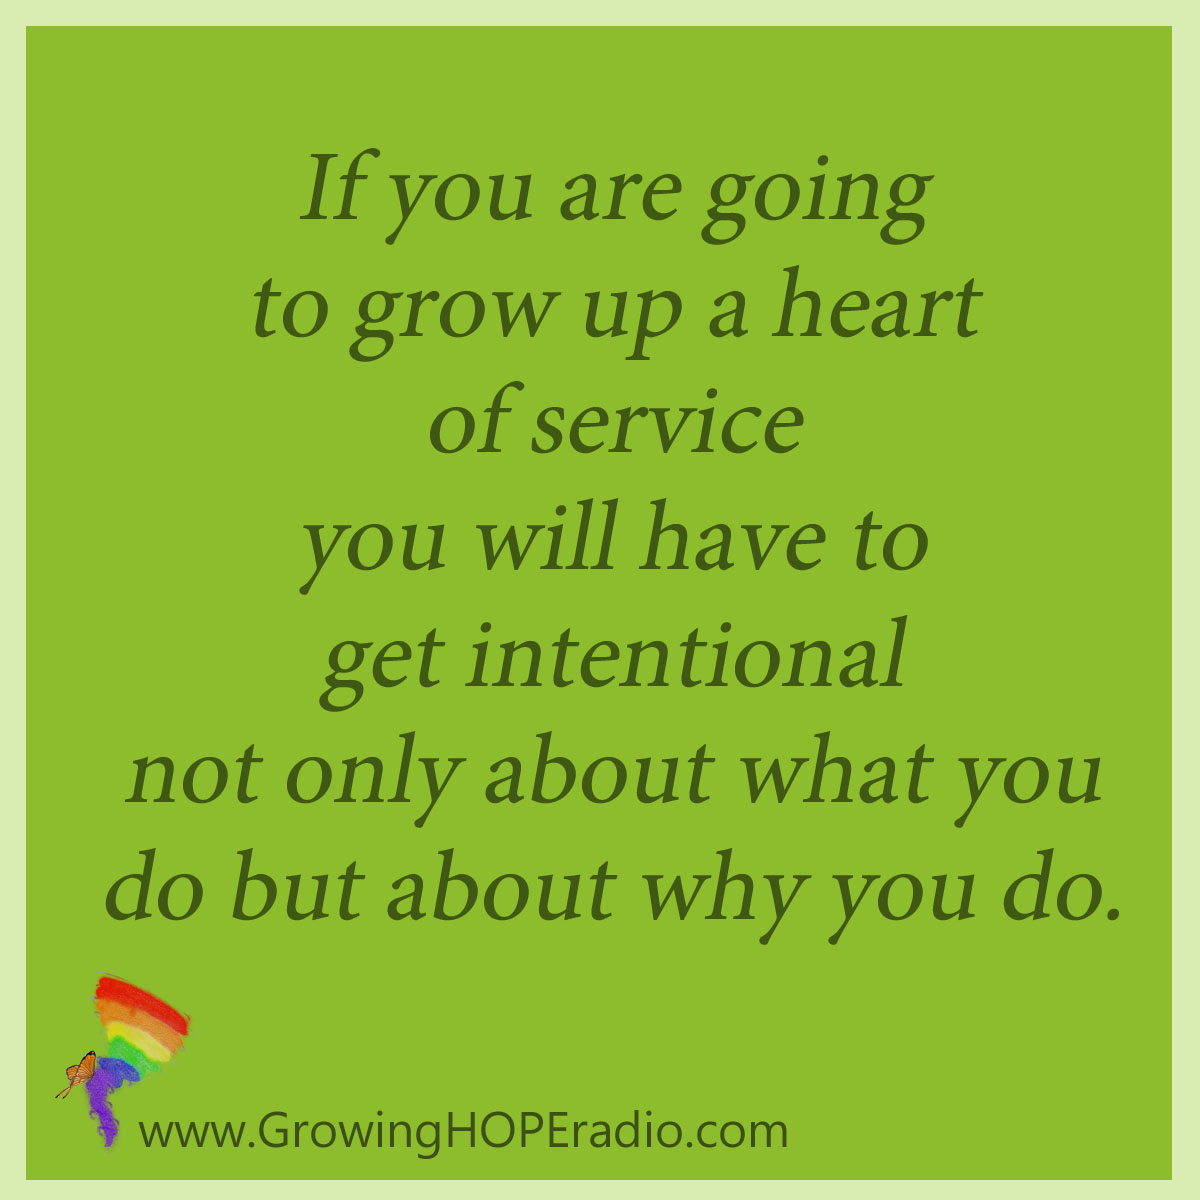 Growing HOPE Daily - quote - heart of service